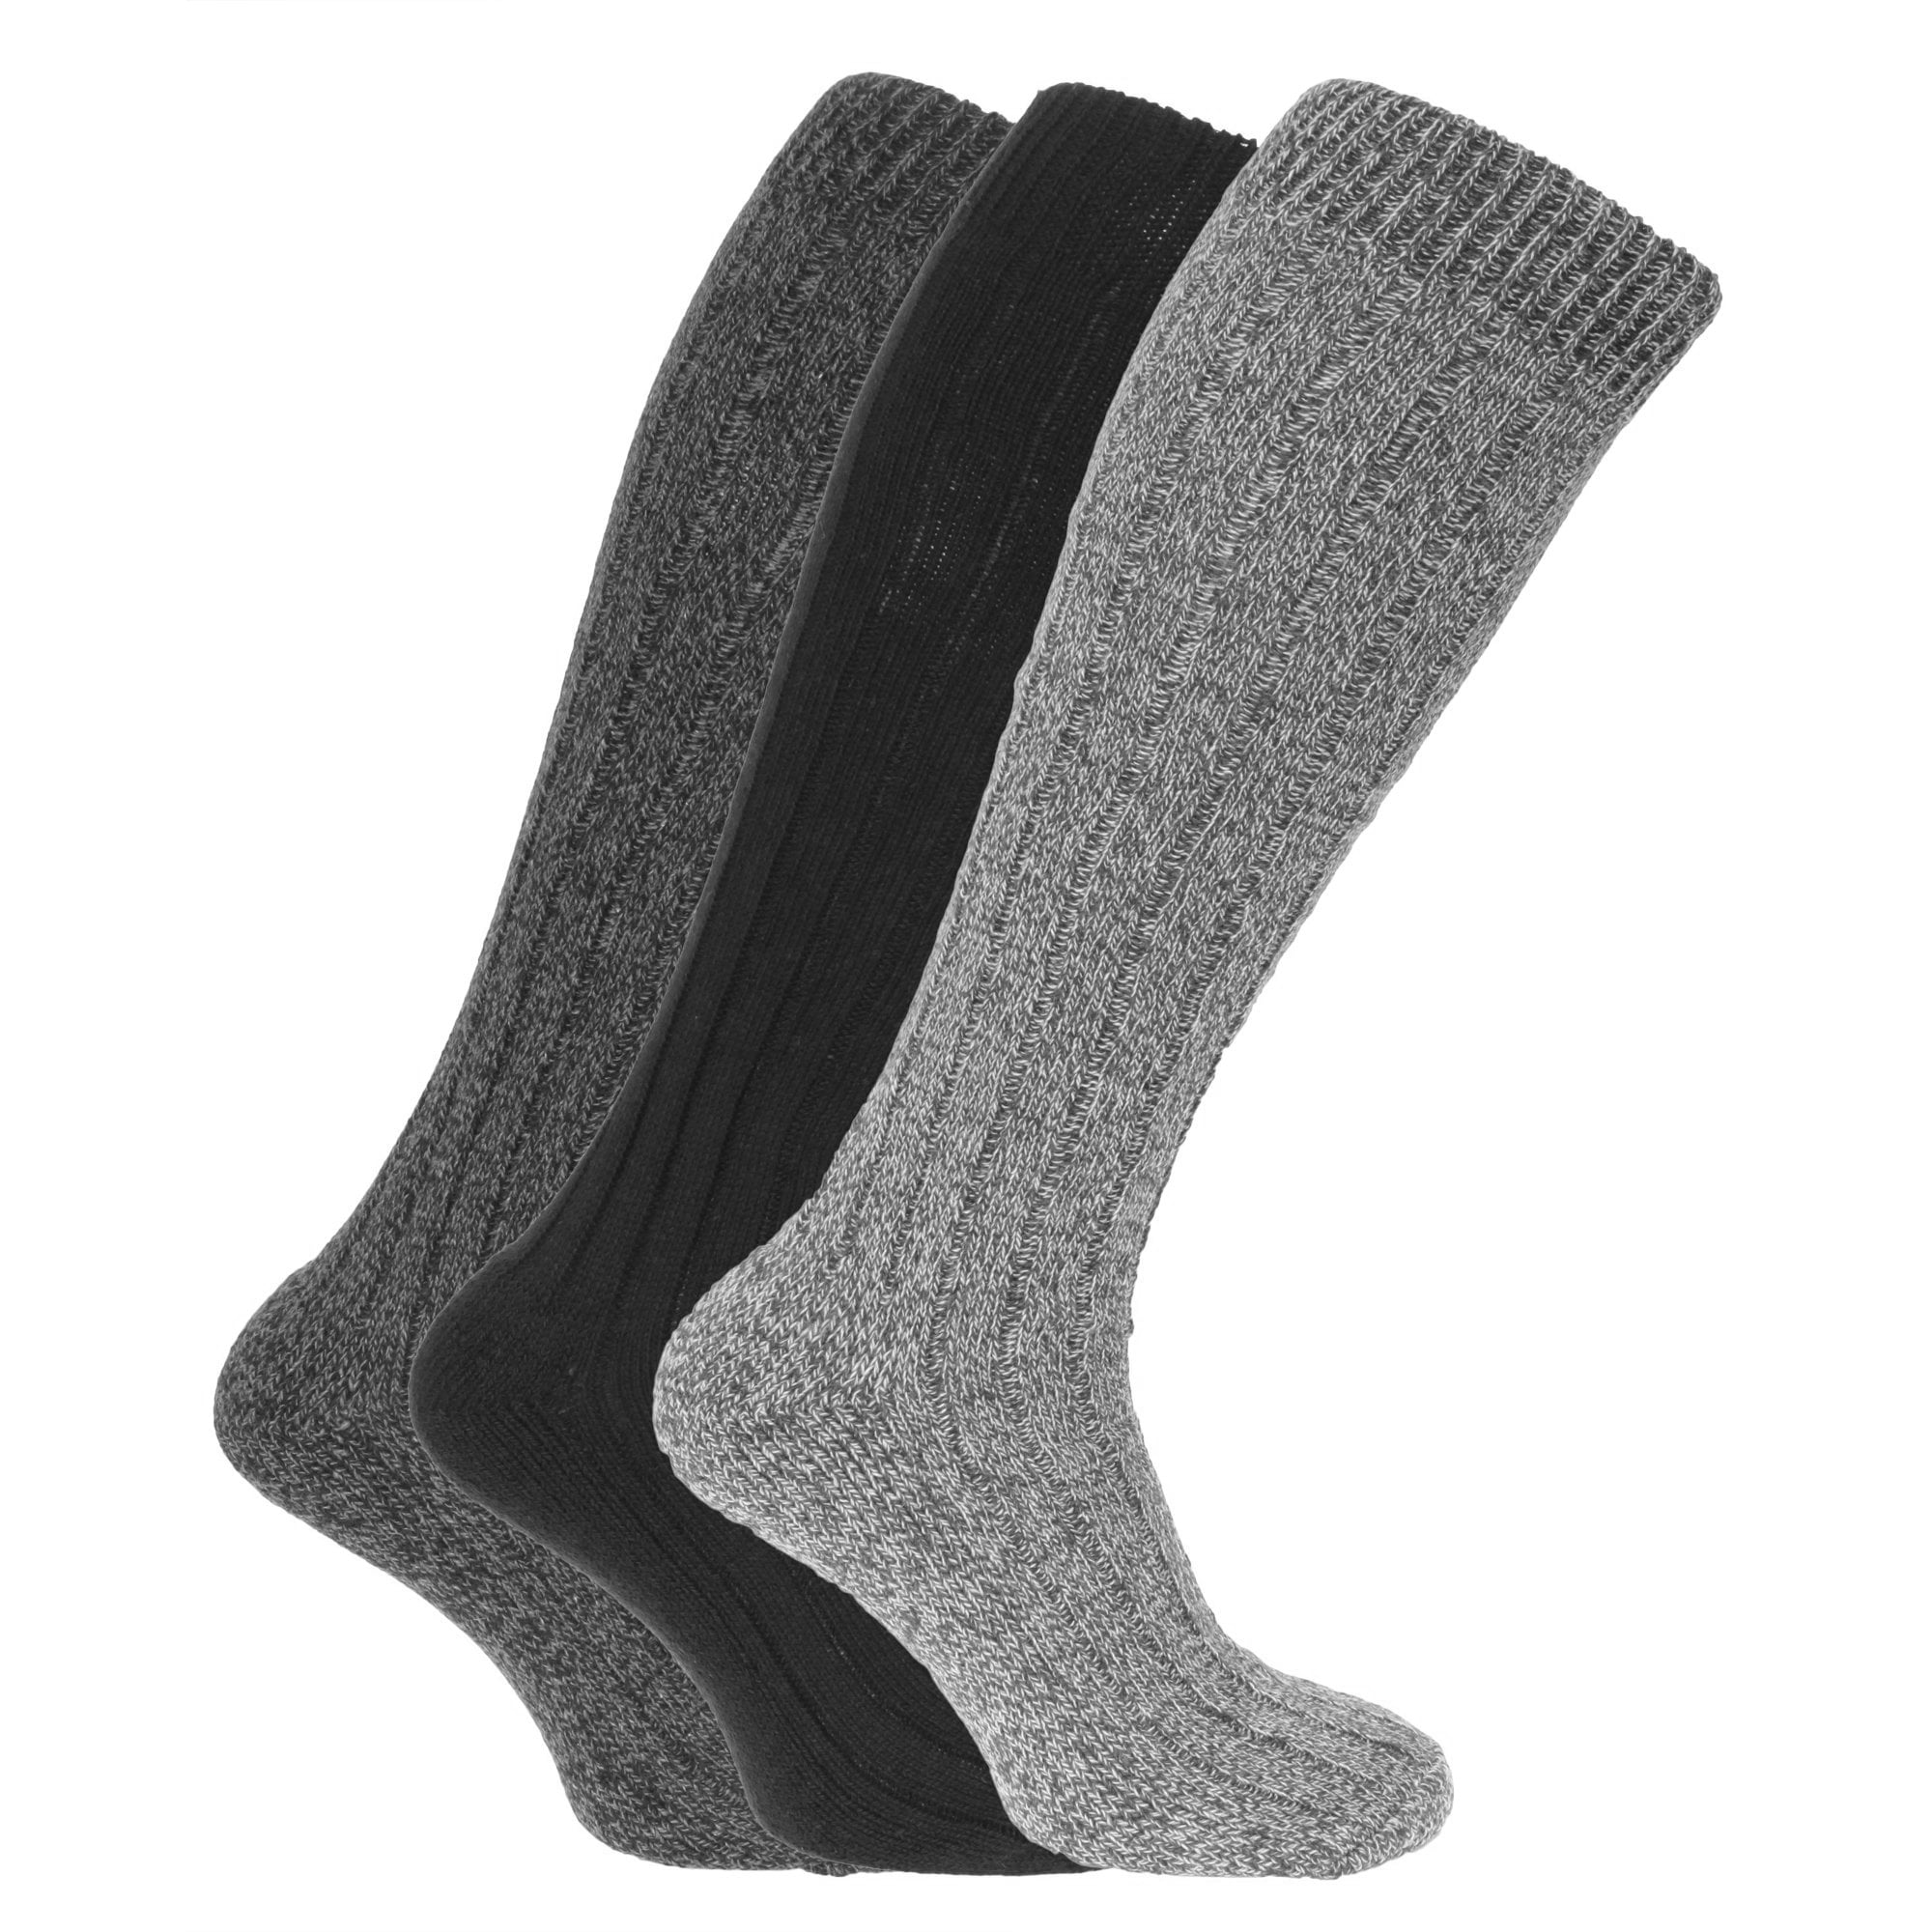 padded sole.extra warmth 3  mens wool blend boot socks LONG Thermal